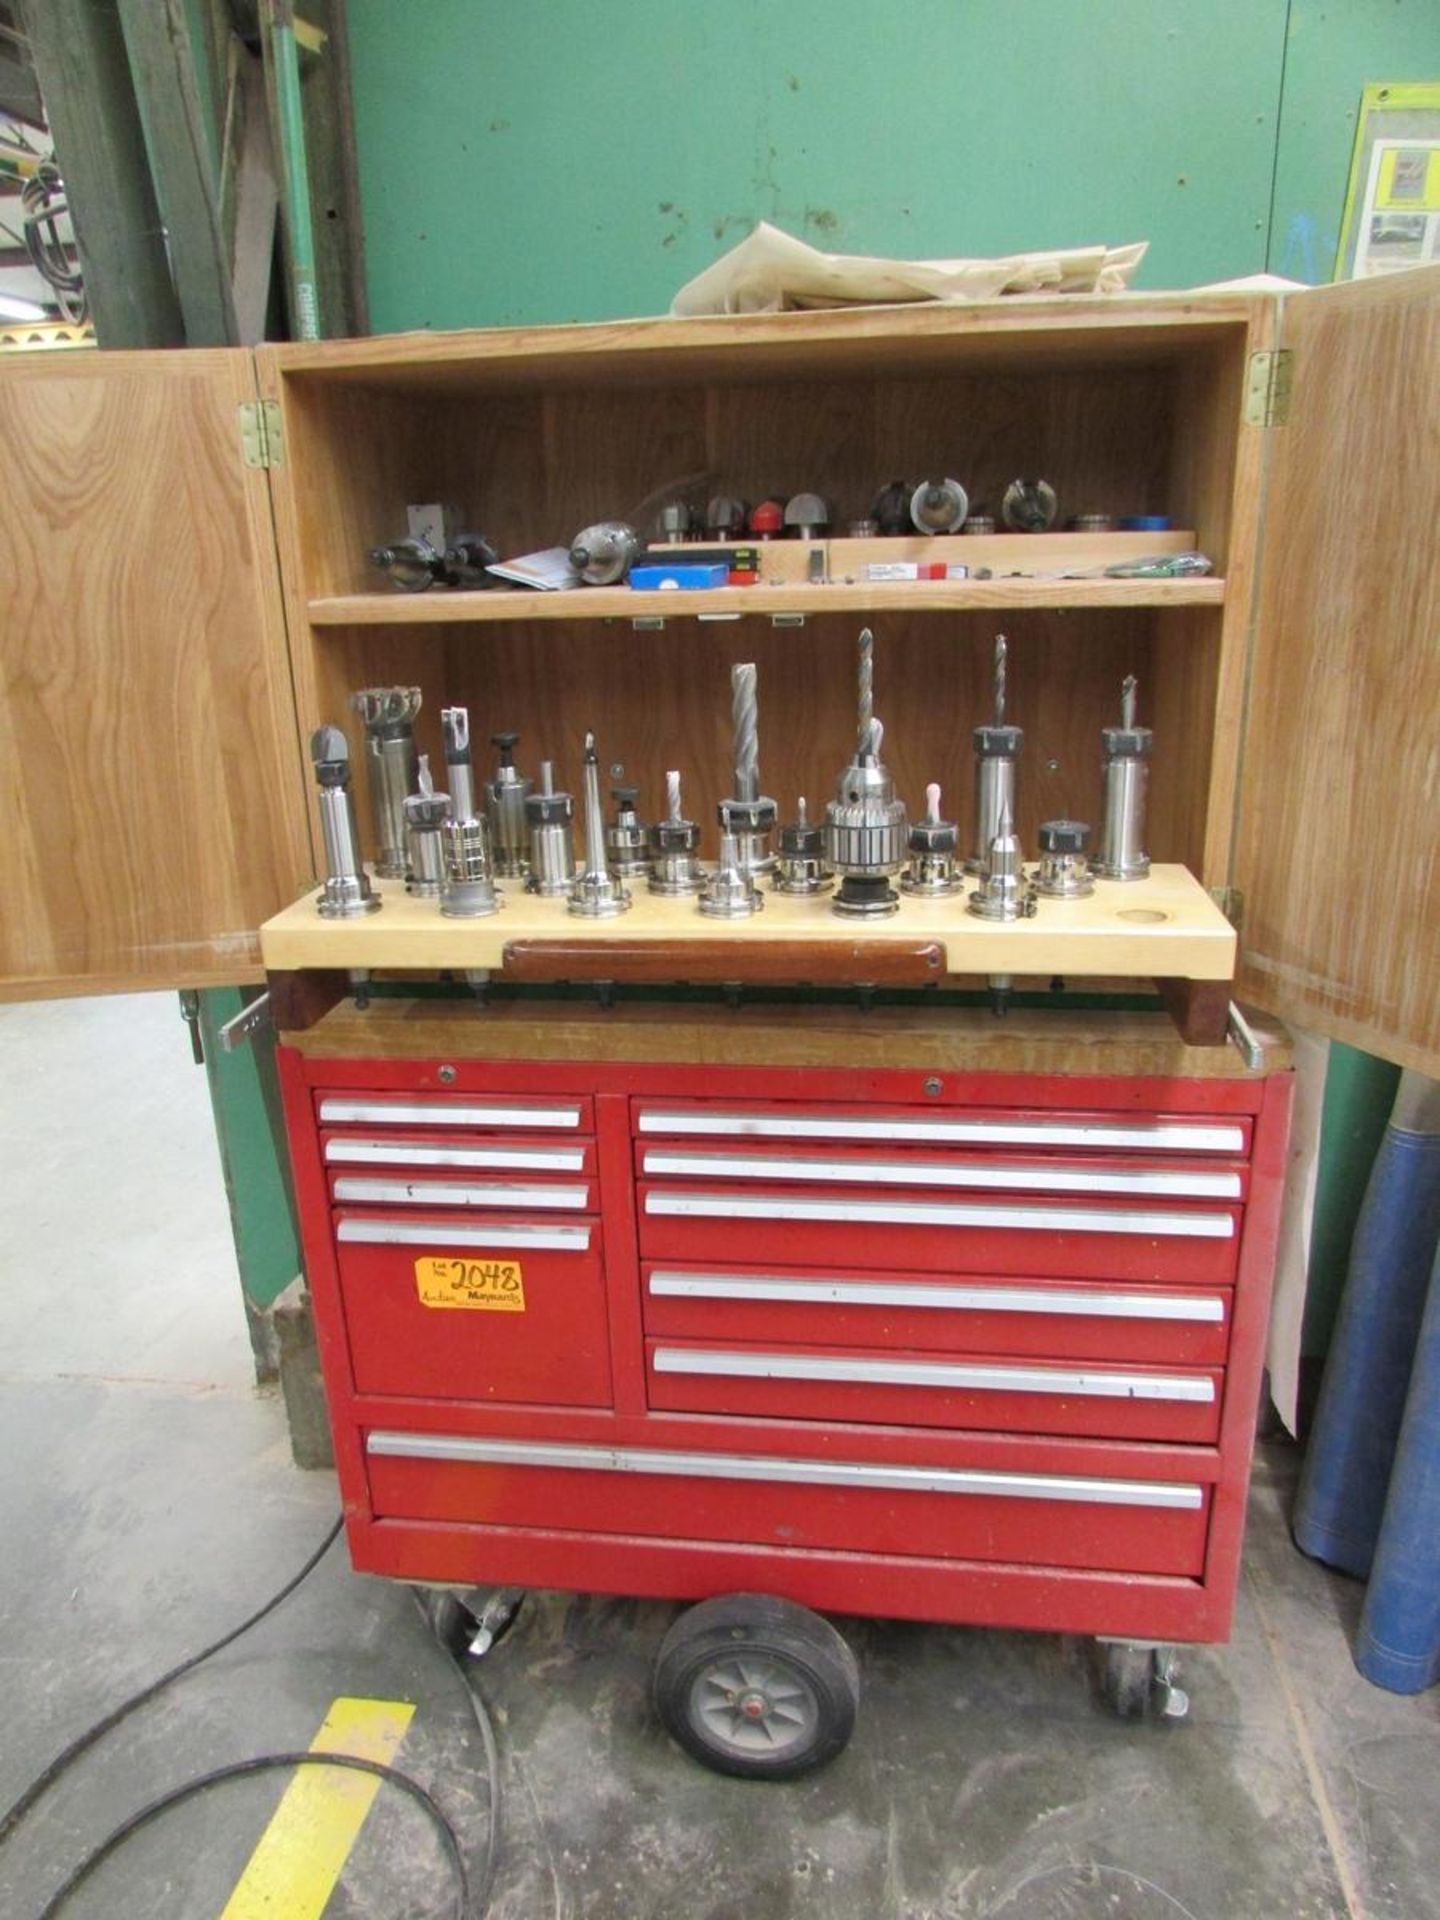 Rolling Tool Box w/ Contents